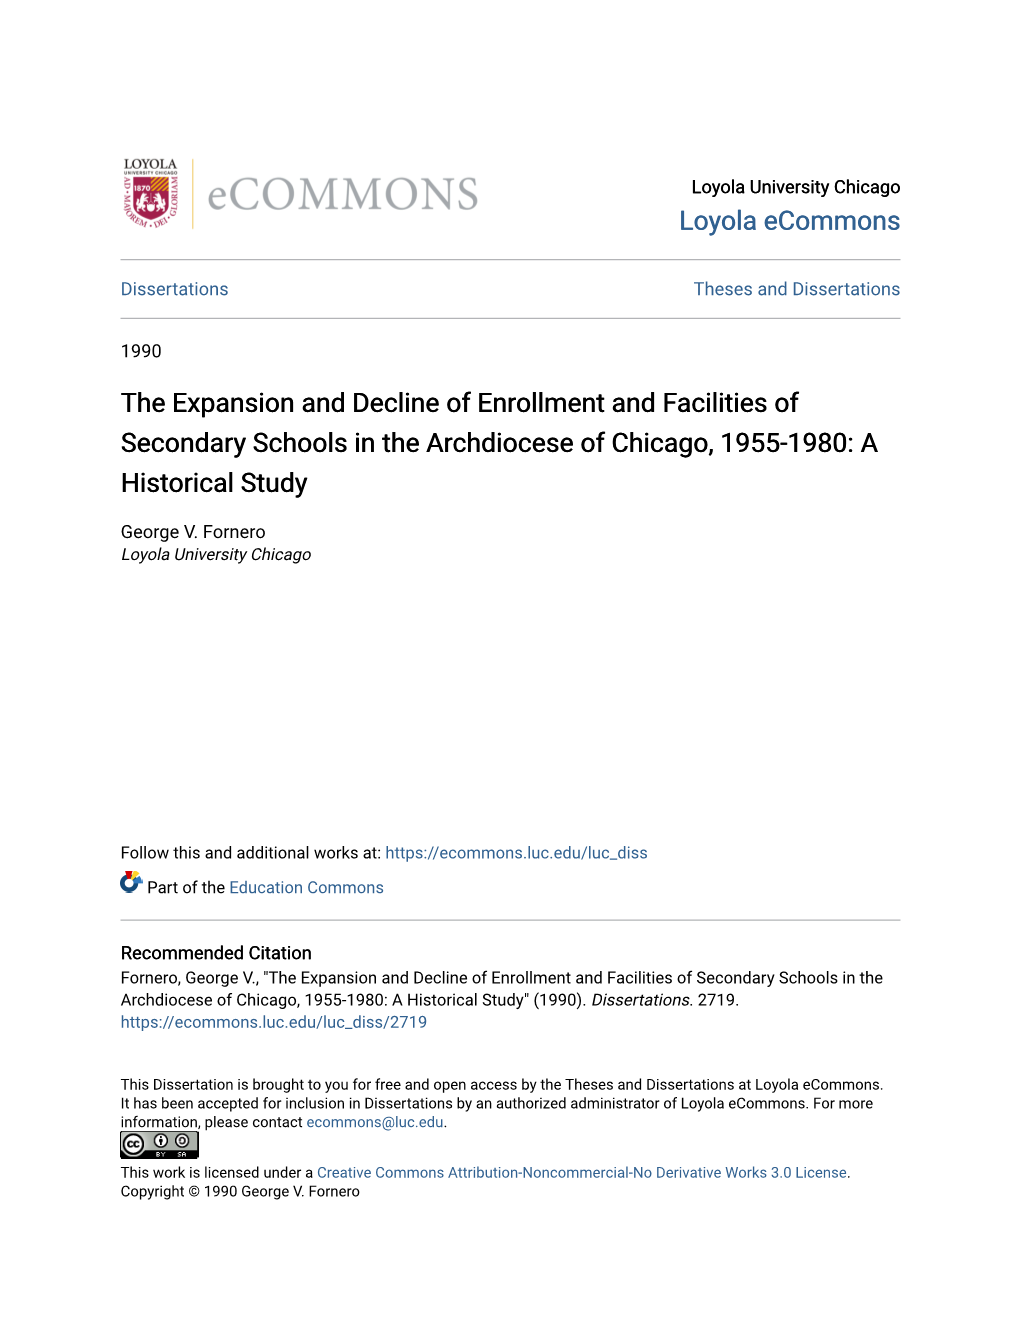 The Expansion and Decline of Enrollment and Facilities of Secondary Schools in the Archdiocese of Chicago, 1955-1980: a Historical Study